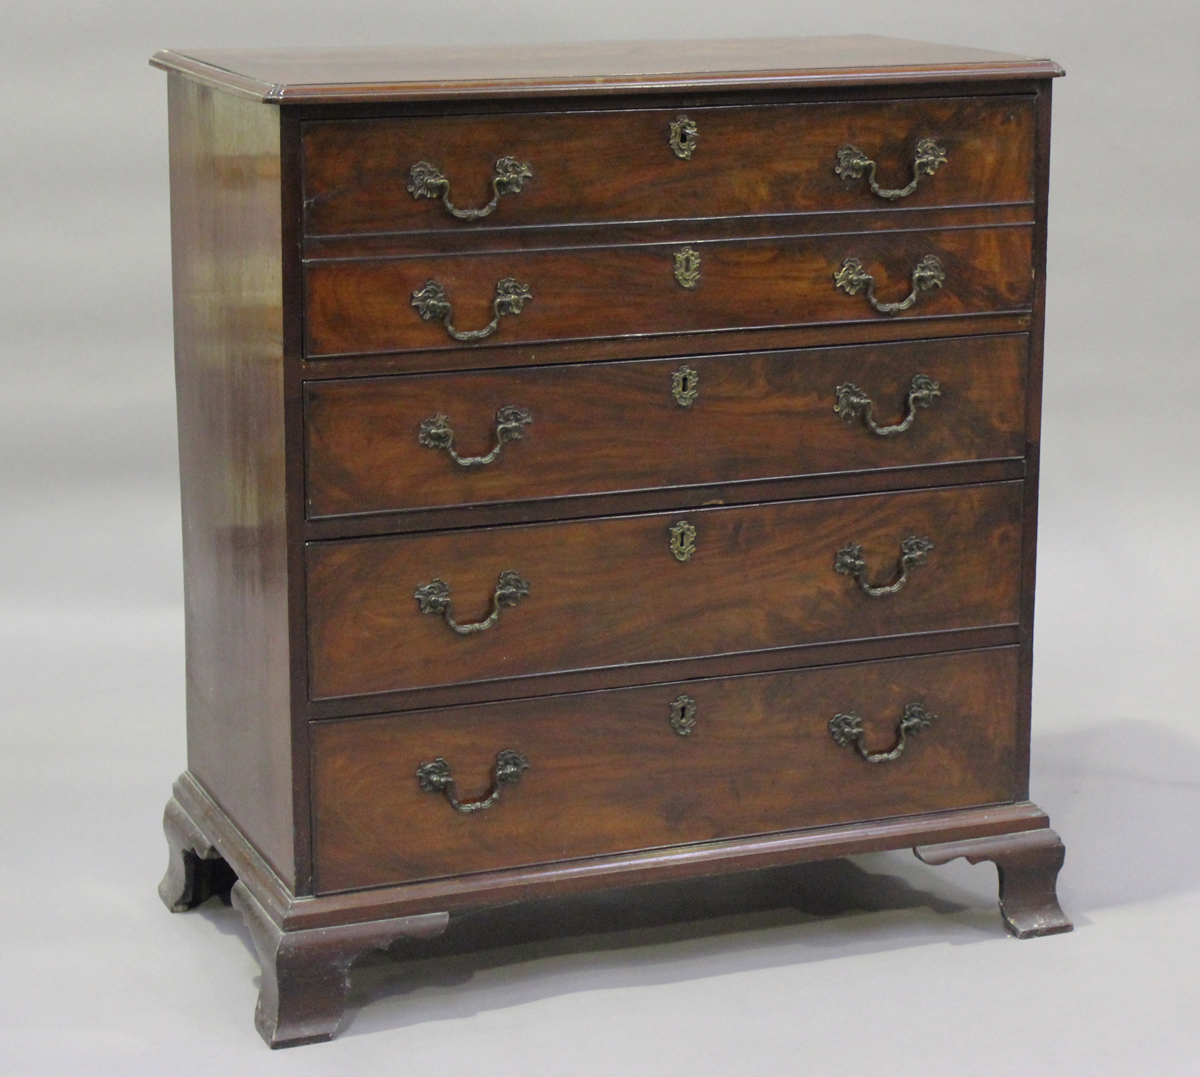 A 19th century mahogany secrétaire chest, the fall front revealing a fitted interior above three